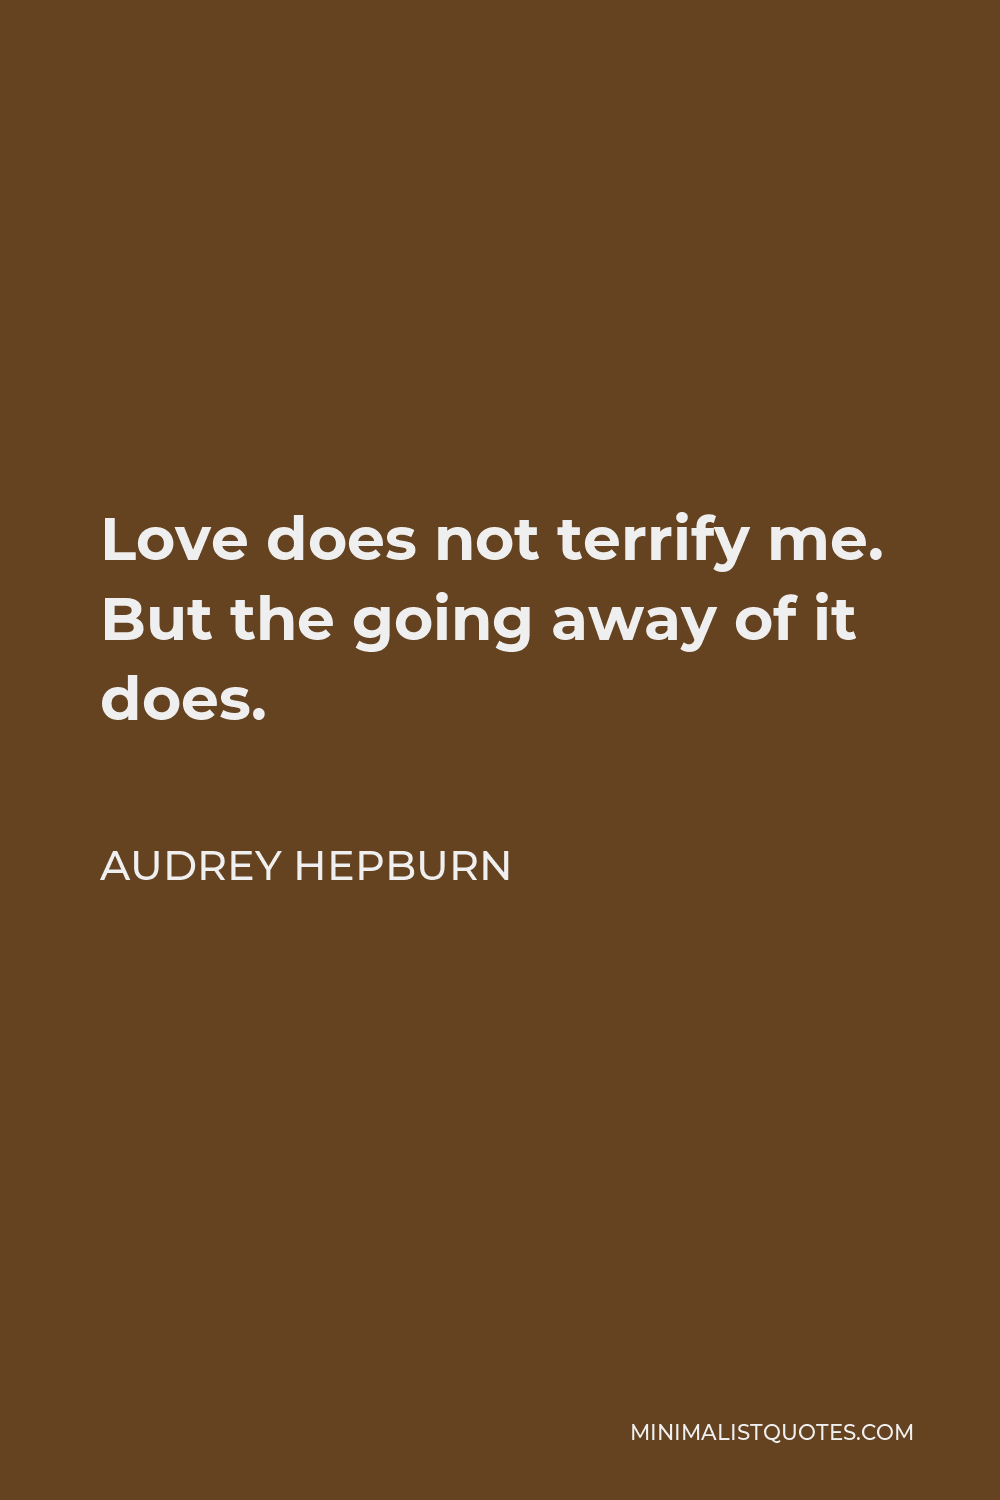 Audrey Hepburn Quote - Love does not terrify me. But the going away of it does.